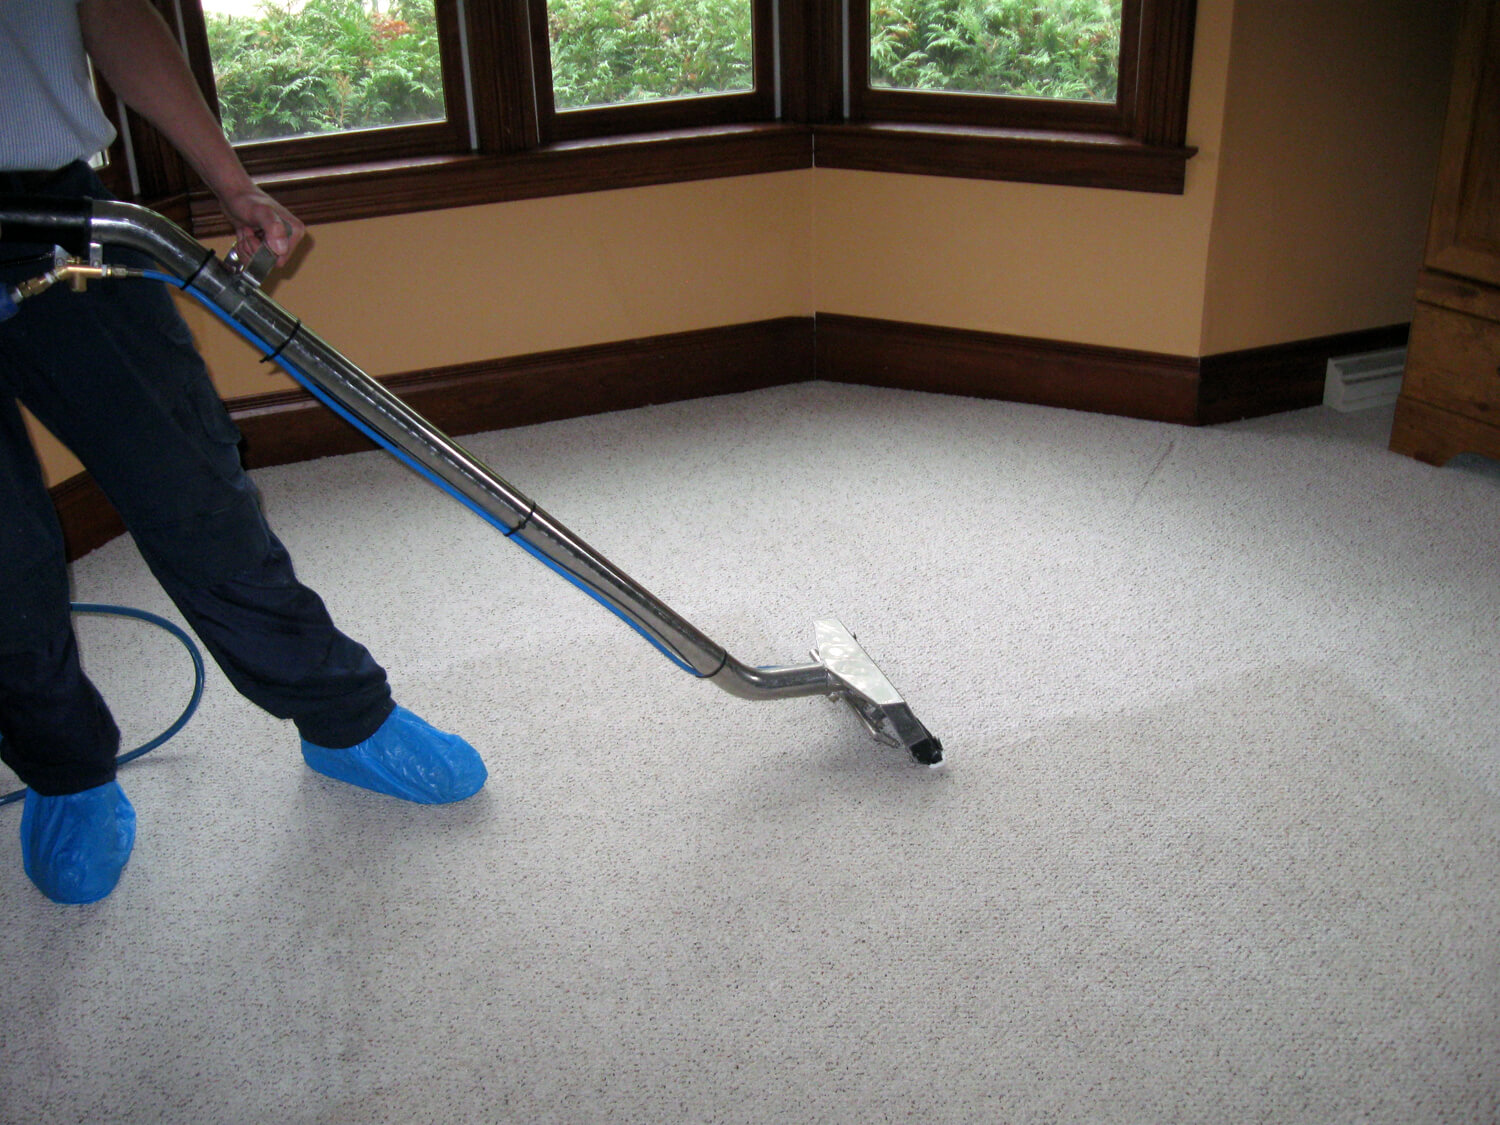 Expert Tips for Finding the Best Same Day Carpet Cleaning Services